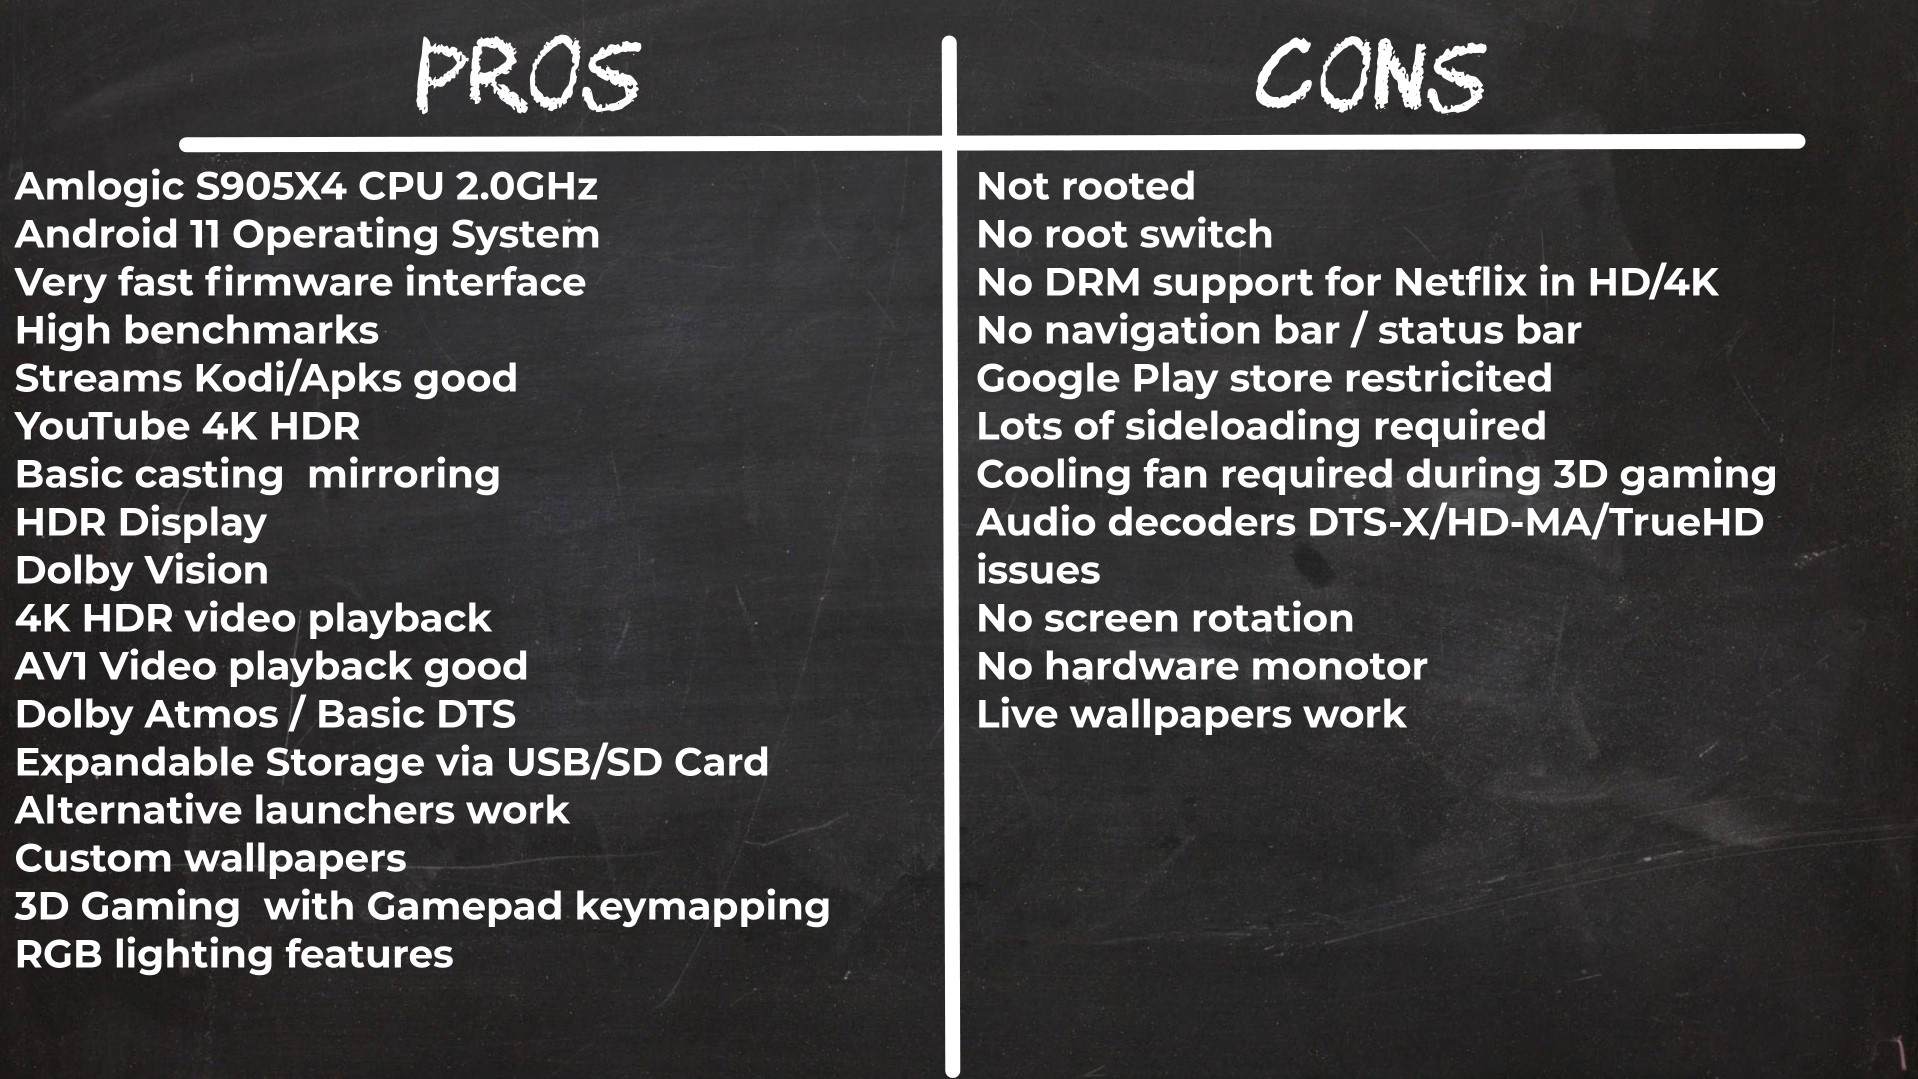 X96 X4 pros and Cons